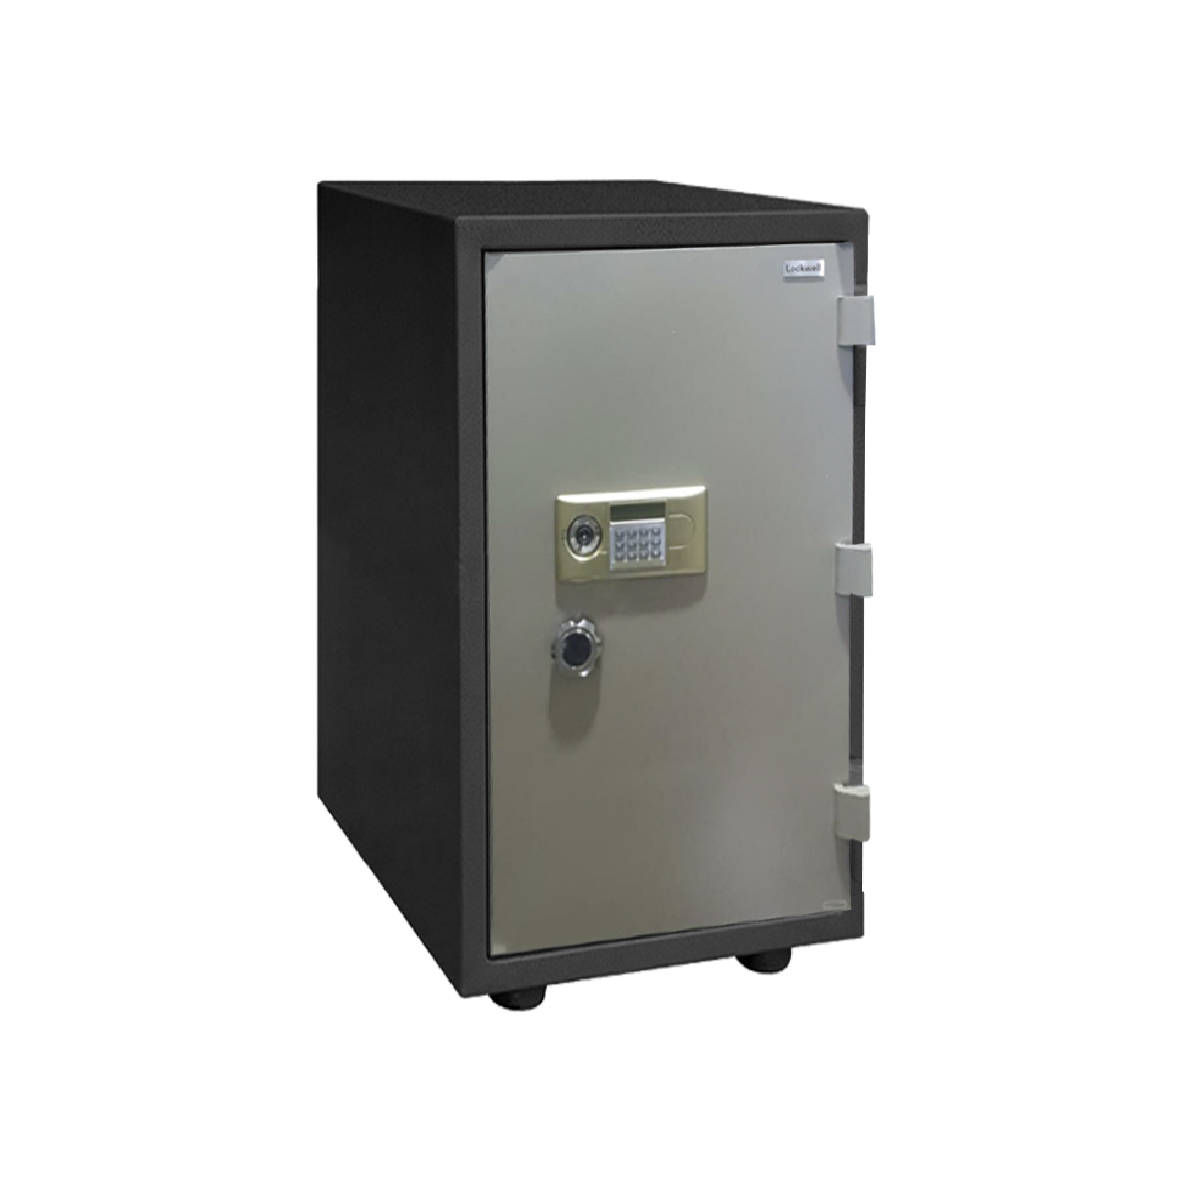 Lockwell ELectronic Fire Safe, YB920ALD